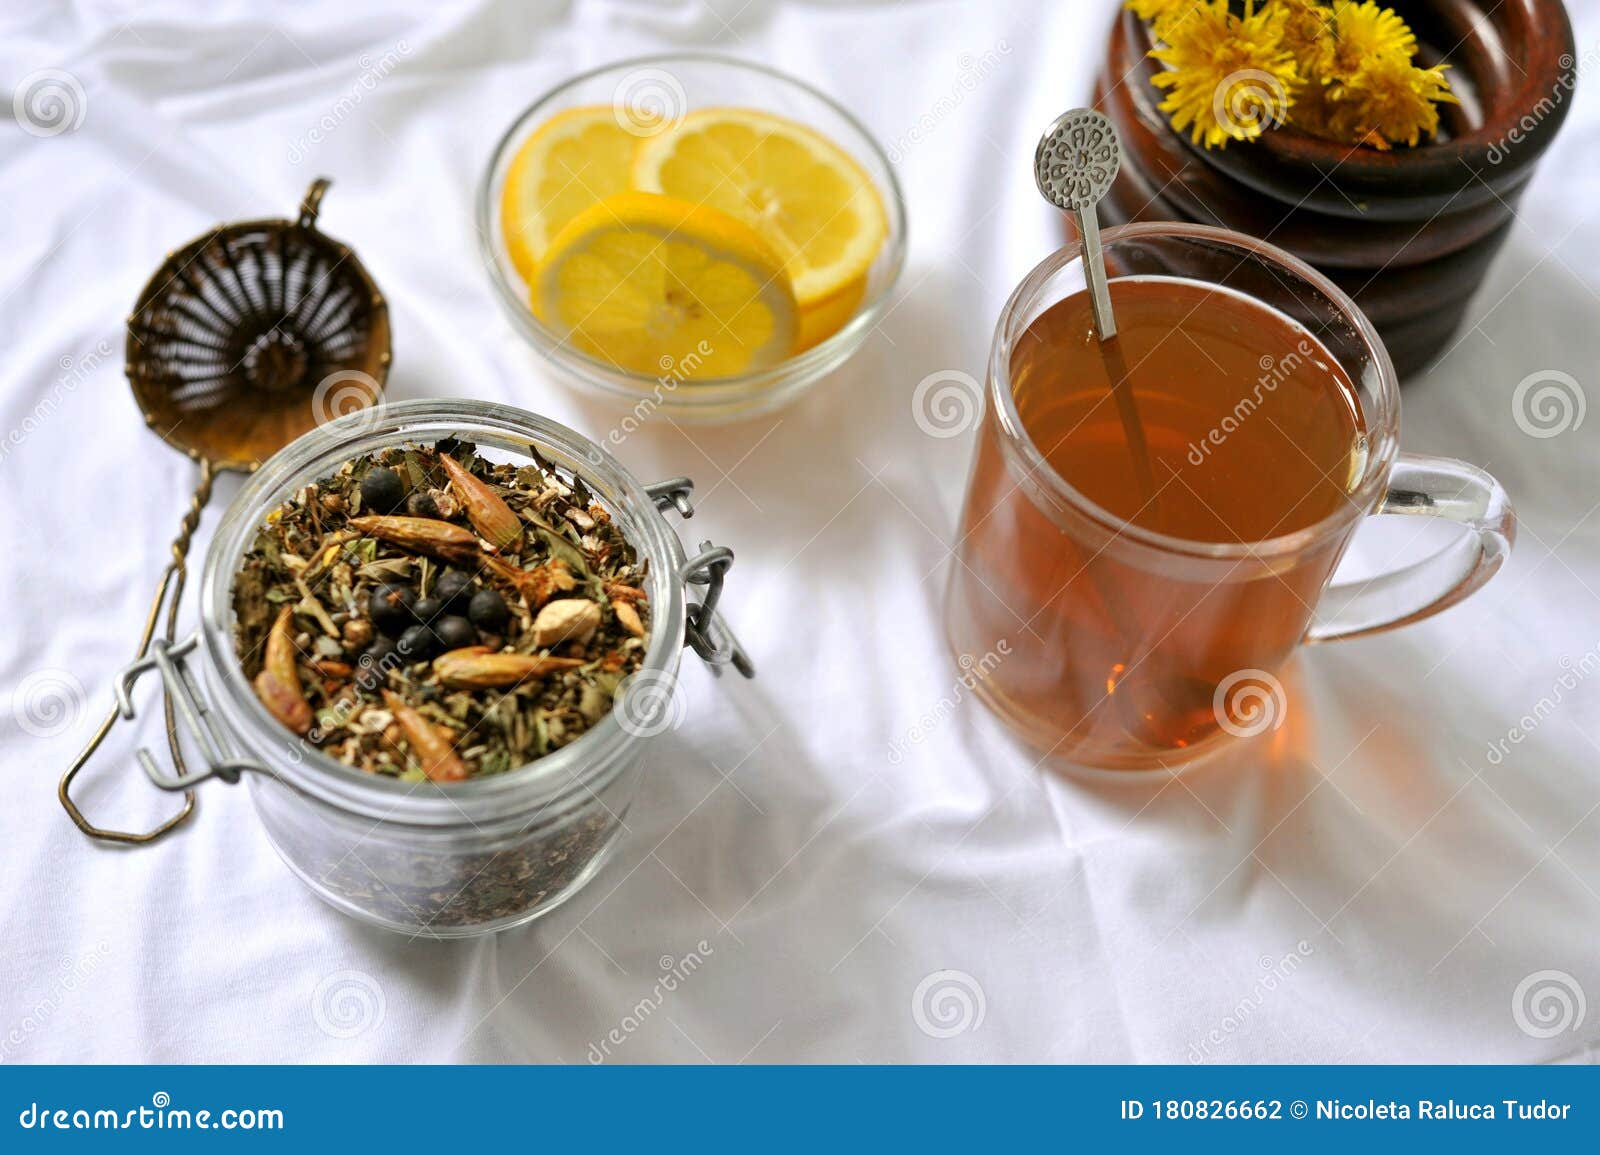 detox, herbal tea helps maintain a healthy immune system, cleanses your digestive system